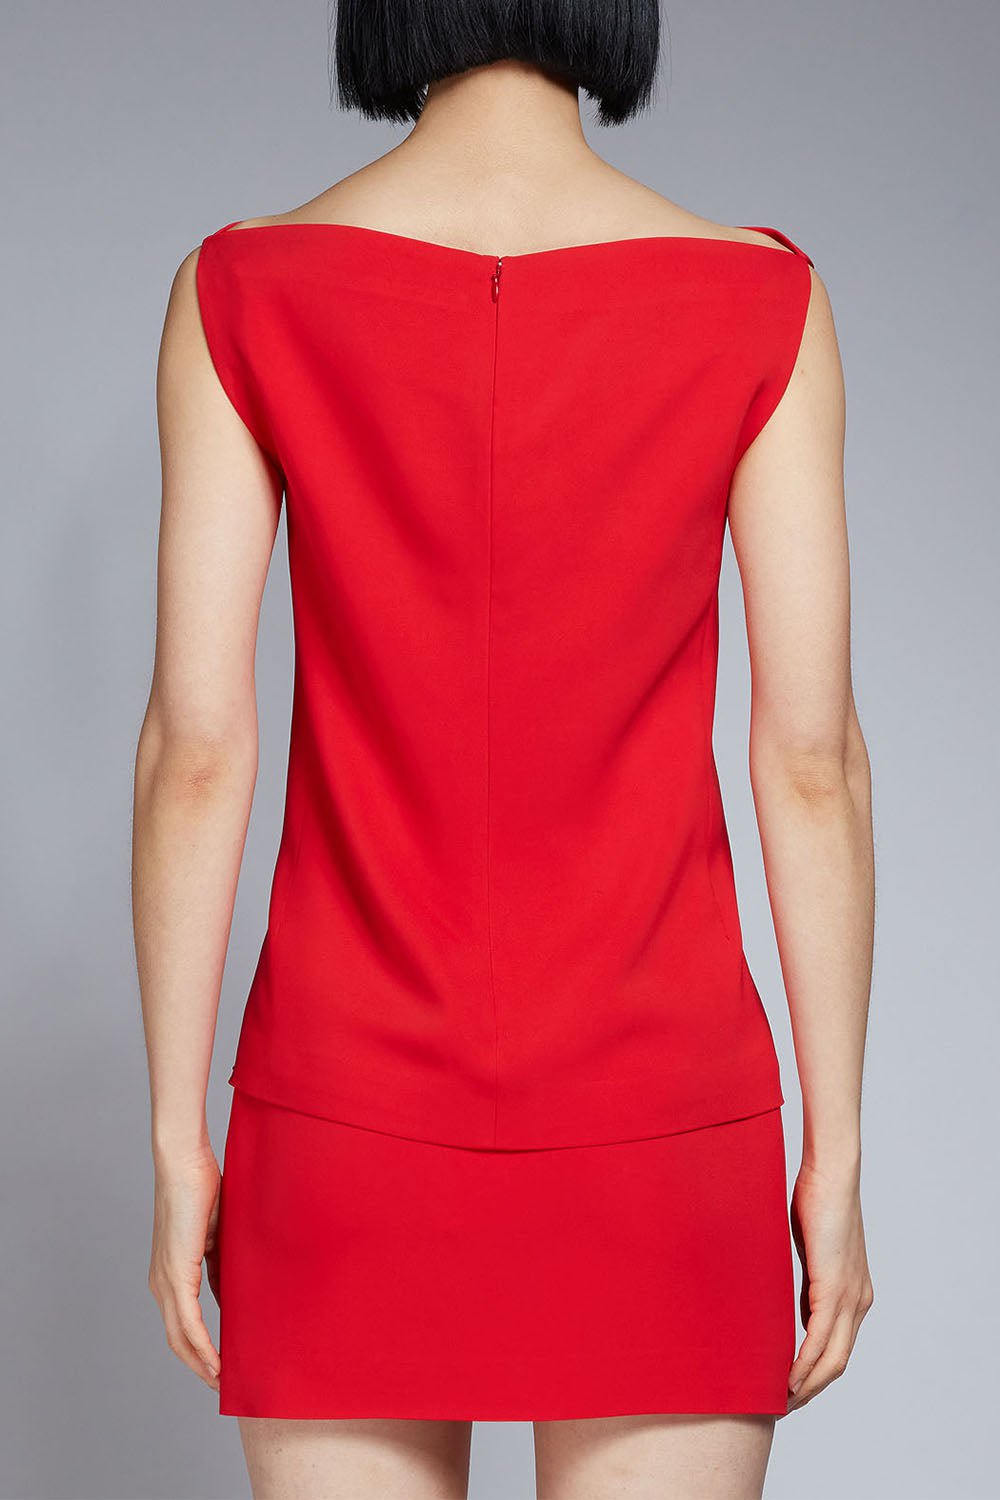 MARNI-Cady Top - Lacquer Red-